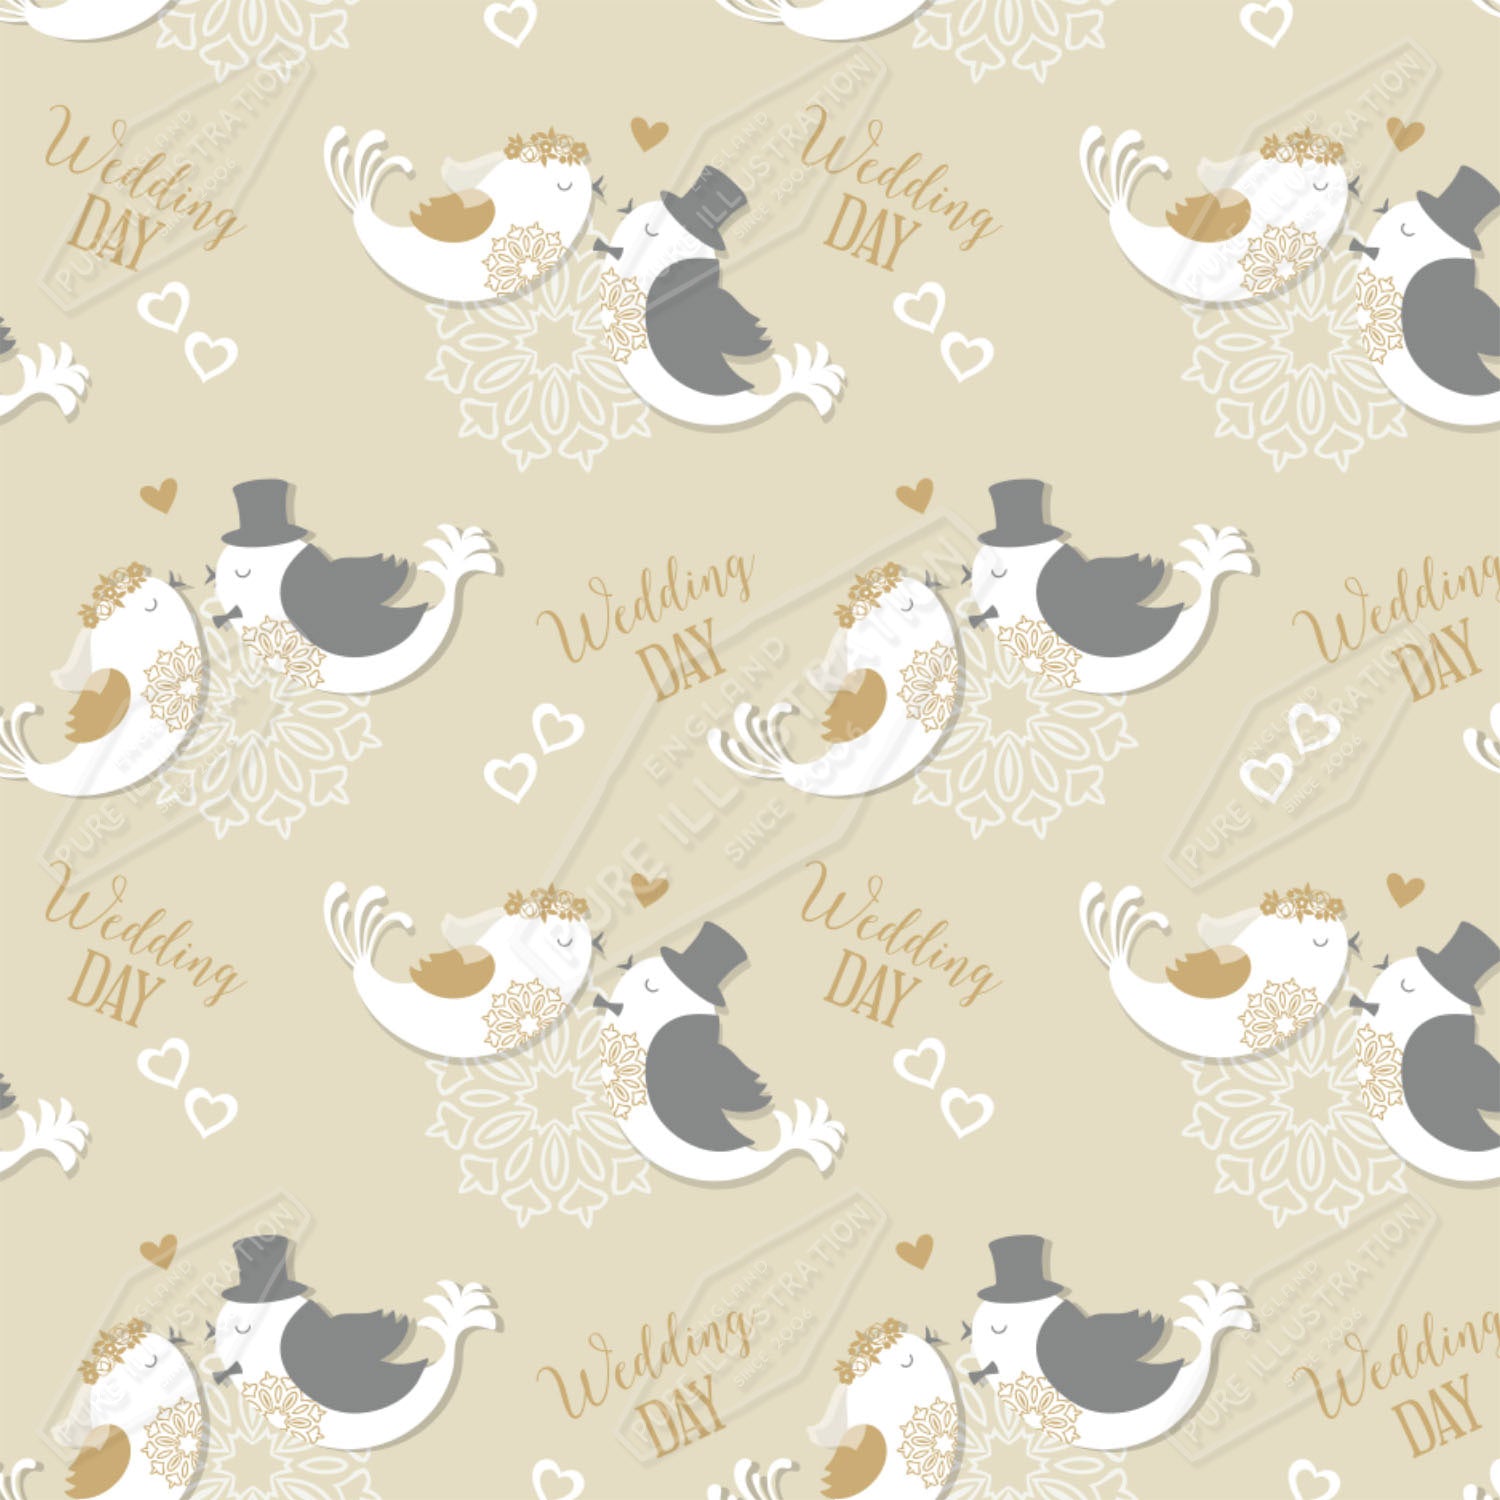 00034978GEG- Gill Eggleston is represented by Pure Art Licensing Agency - Wedding Pattern Design